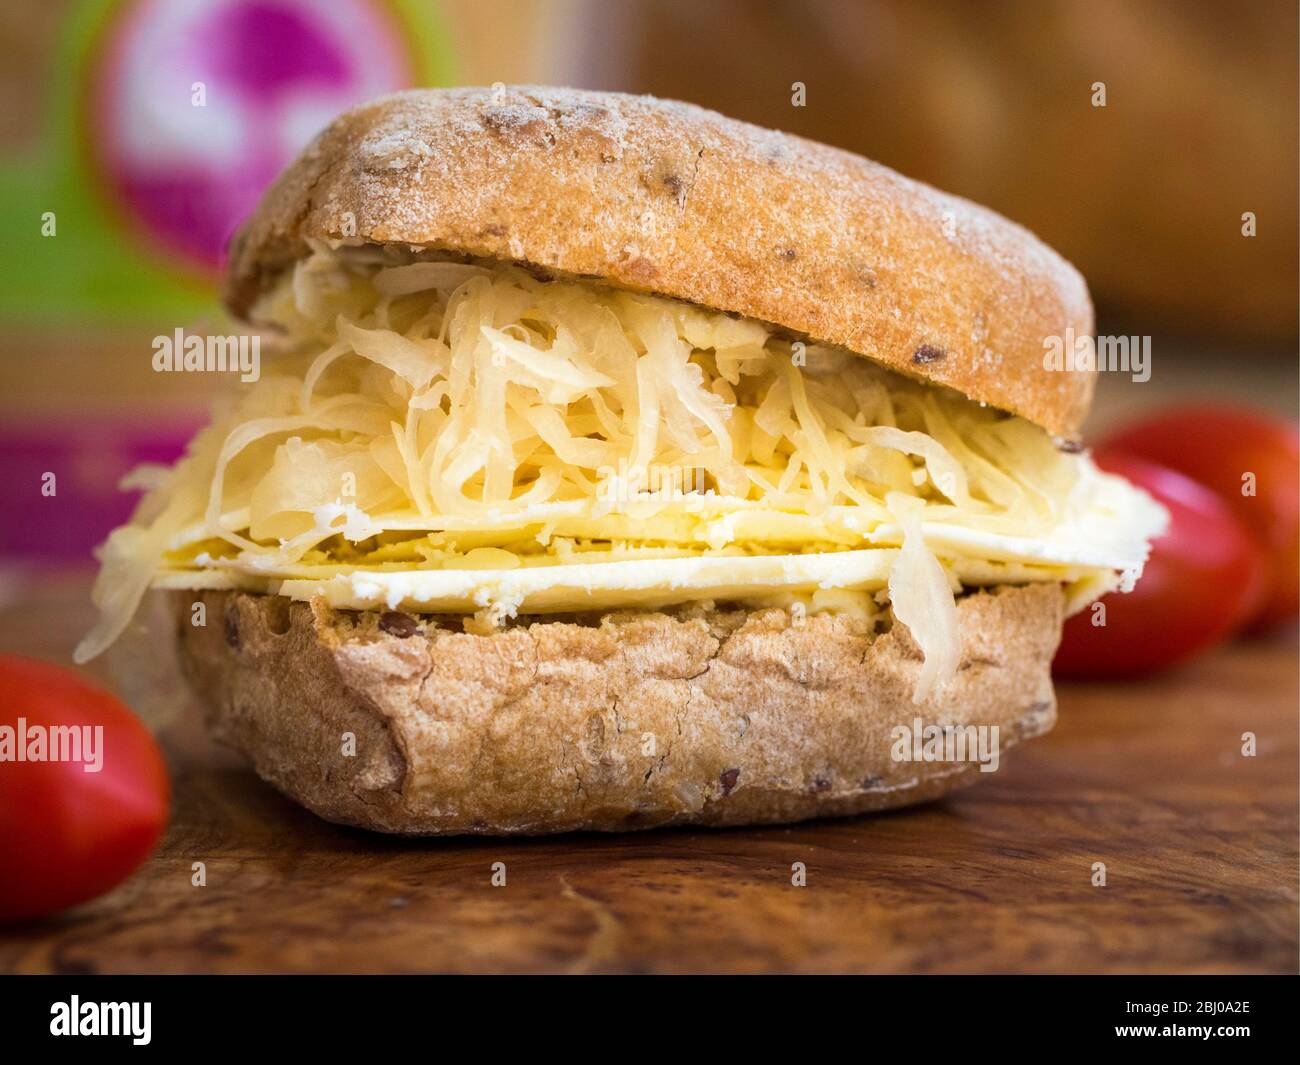 Nourishing lunchtime sandwich of thinly sliced Cheshire cheese with sauerkraut on brown seeded ciabatta. (Gluten free bread) Stock Photo